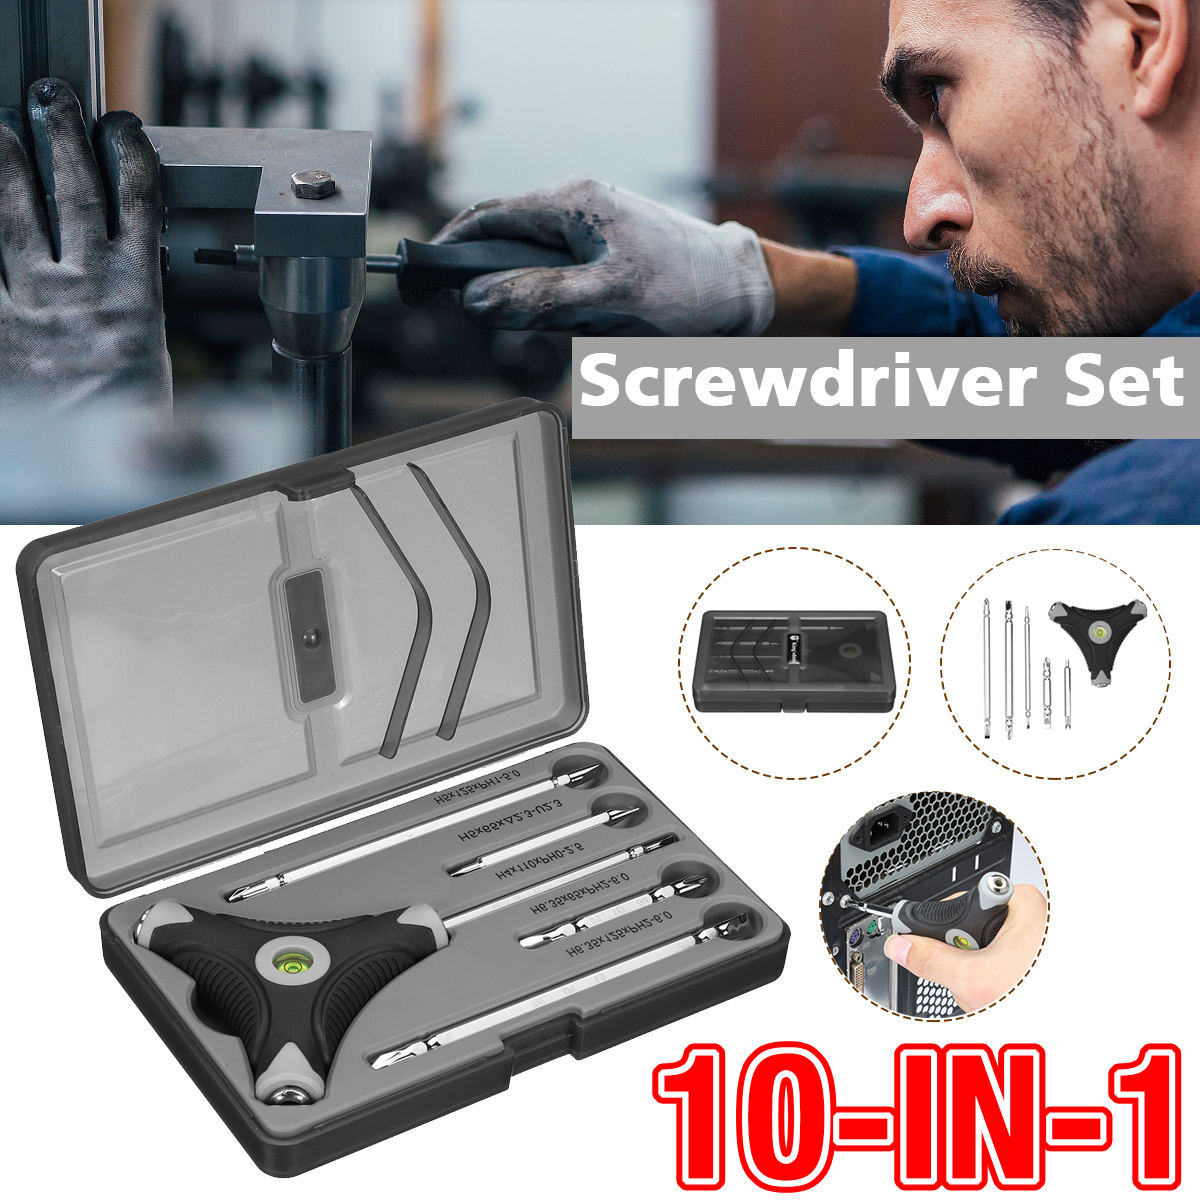 10-In-1-Household-Precision-Screwdriver-Set-With-Spirit-Level-Strength-Saving-Structure-Screw-Driver-1681086-3